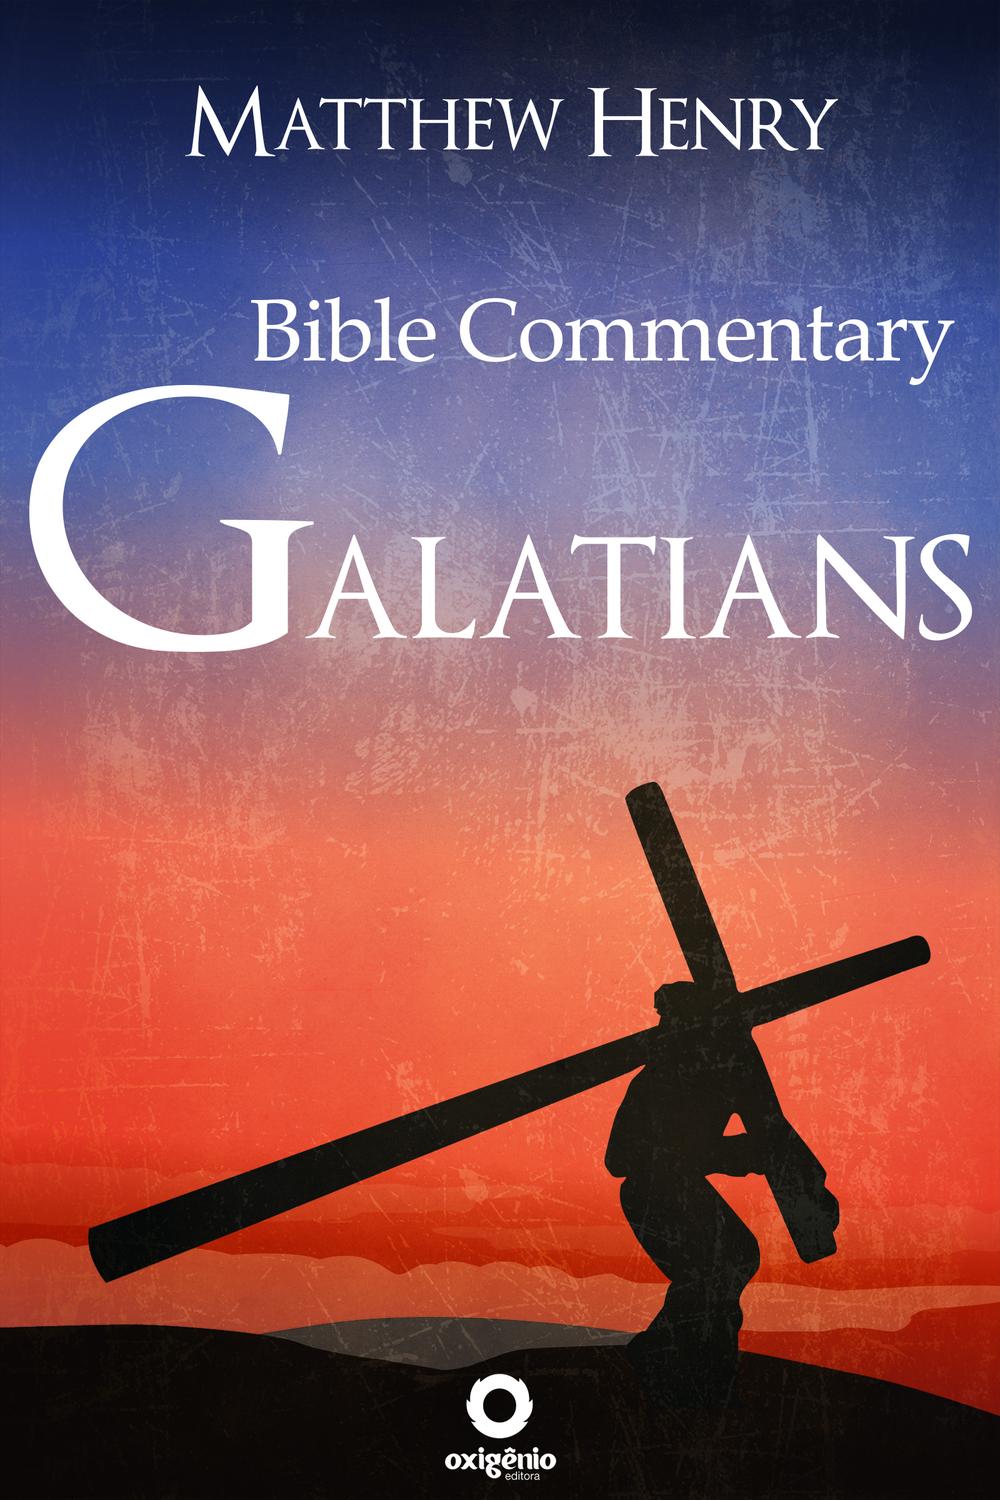 Galatians - Complete Bible Commentary Verse by Verse - Matthew Henry